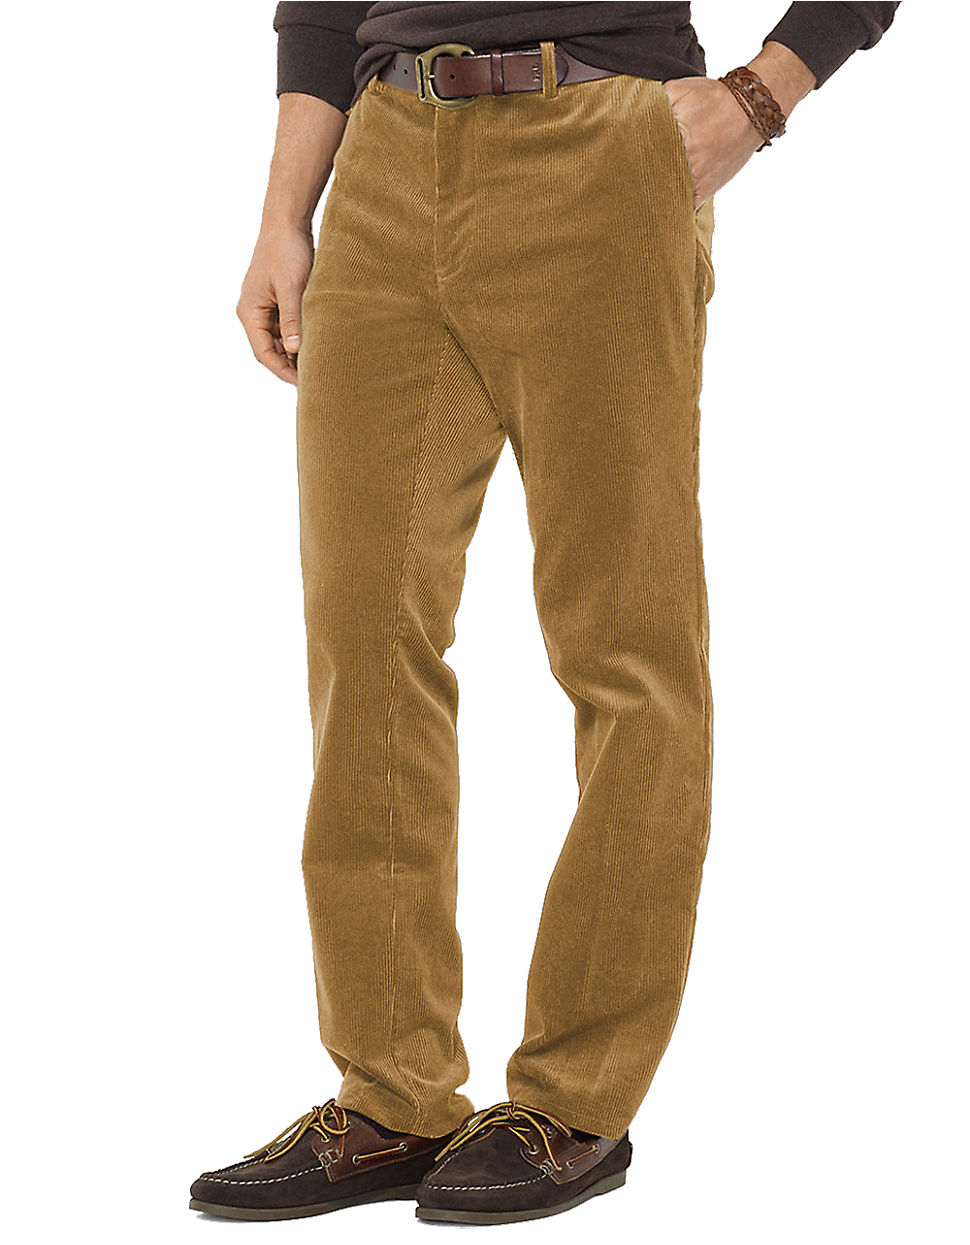 Polo ralph lauren Classic-Fit Stretch-Corduroy Pants in Natural for Men ...